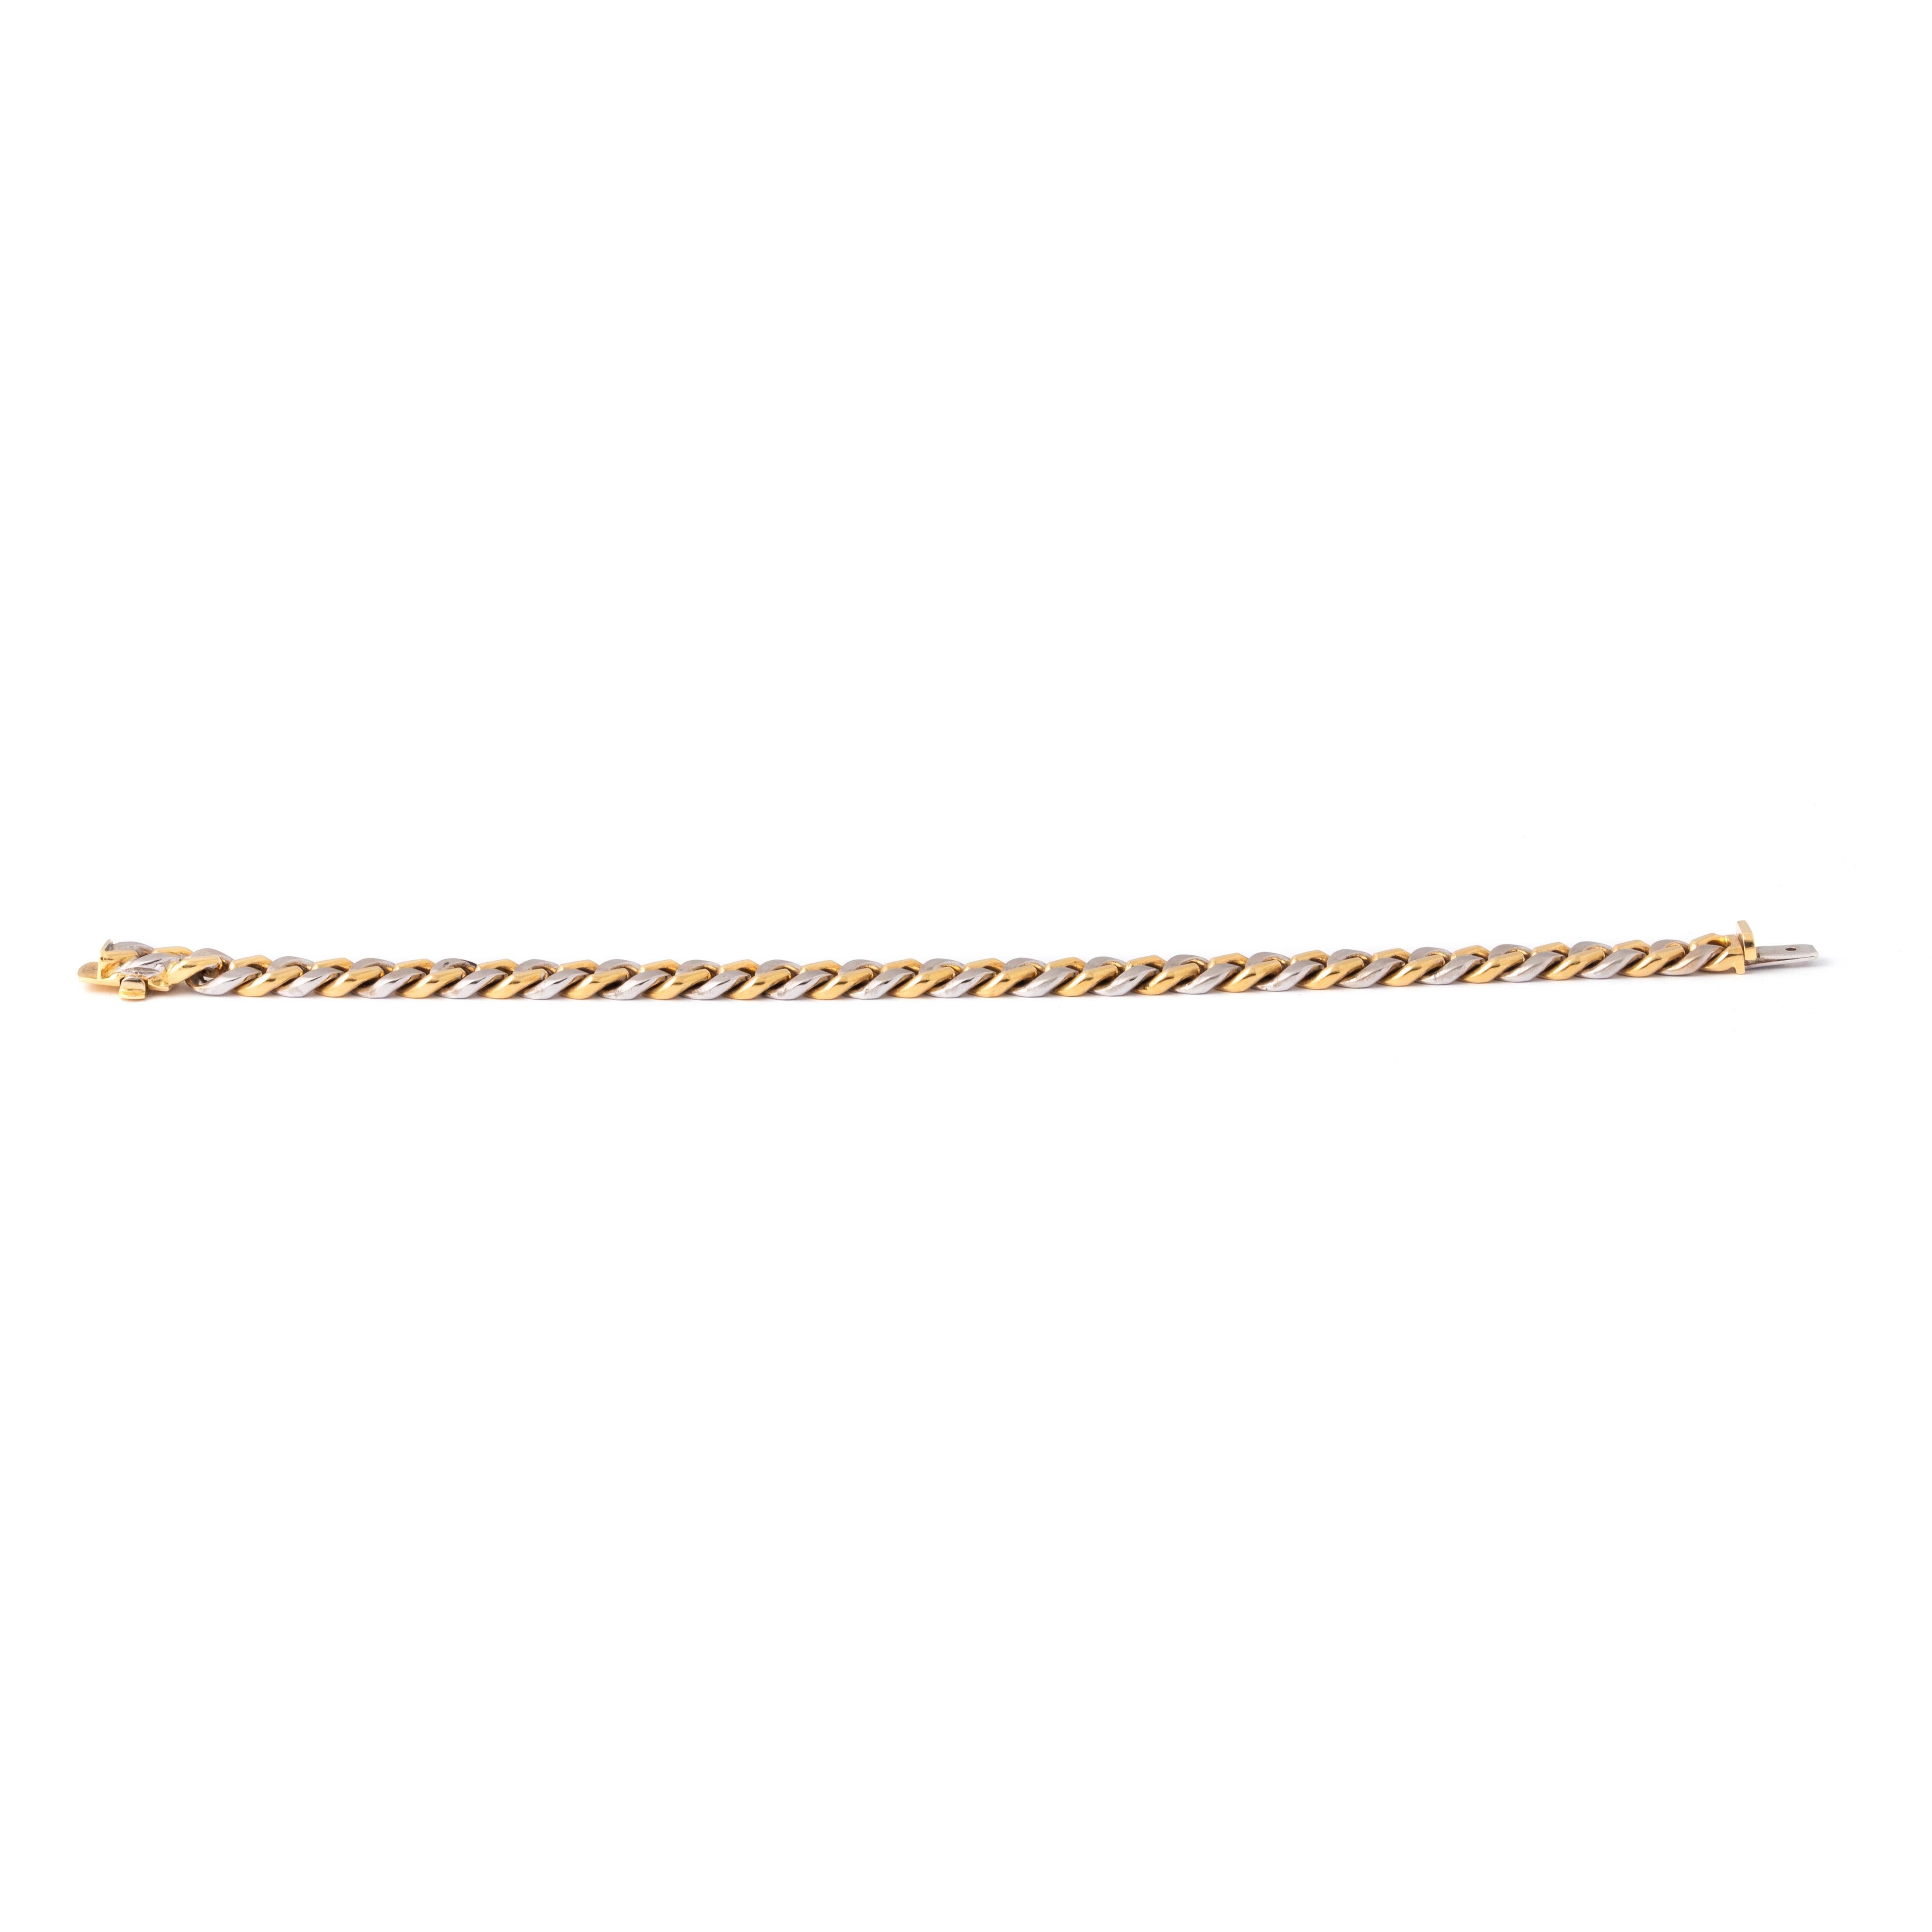 White & Yellow 18K Gold Chain Bracelet.

Adorn your wrist with timeless elegance and sophistication with this exquisite White & Yellow 18K Gold Chain Bracelet. Crafted to perfection, the bracelet seamlessly blends the luster of white and yellow